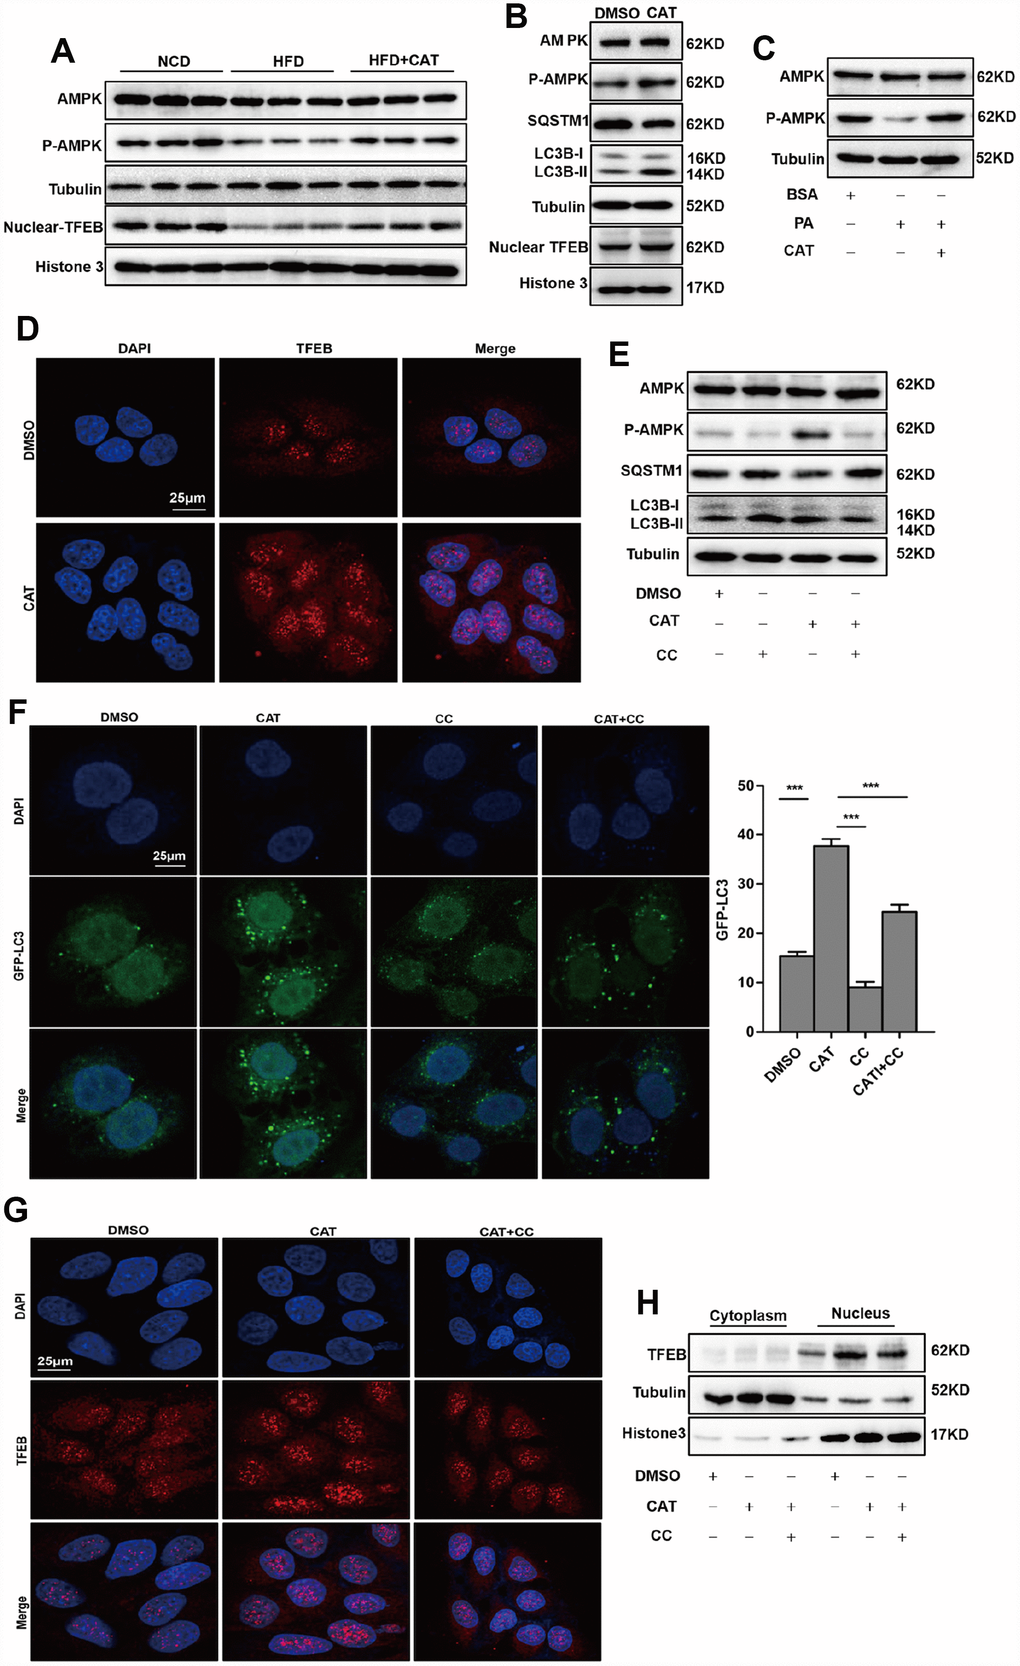 CAT induced autophagy via the AMPK-TFEB pathway. (A) Immunoblot detection of TFEB, AMPK, and AMPK phosphorylation levels in livers of mice. (B) Immunoblot detection of LC3-II, SQSTM1, TFEB, AMPK, and AMPK phosphorylation levels in HepG2 cells treated with CAT (10 μg/mL) for 24 h. (C) Immunoblot analysis of AMPK and p-AMPK levels in HepG2 cells treated with 0.3 mM palmitate (PA) and 10 μg/mL CAT for 24 h. (D) Fluorescence microscopy images of nuclear TFEB in HepG2 cells treated with 10 μg/mL CAT for 24 h. Scale bars: 25 μm. (E) Immunoblots of LC3-II, SQSTM1, AMPK, and AMPK phosphorylation in HepG2 cells treated with CAT (10 μg/mL) and Compound C (CC, 10 μM) for 24 h. (F) Numbers of GFP-LC3 in HepG2 cells expressing GFP-LC3 after treatment with or without CAT (10 μg/mL) and CC (10 μM) for 24 h were evaluated using fluorescence microscopy. Scale bars: 25 μm. (G, H) Fluorescence microscopy images and Immunoblot analysis of nuclear TFEB in HepG2 cells treated with 10 μg/mL CAT and Compound C (CC, 10 μM) for 24 h. Scale bars: 25 μm. ***P 